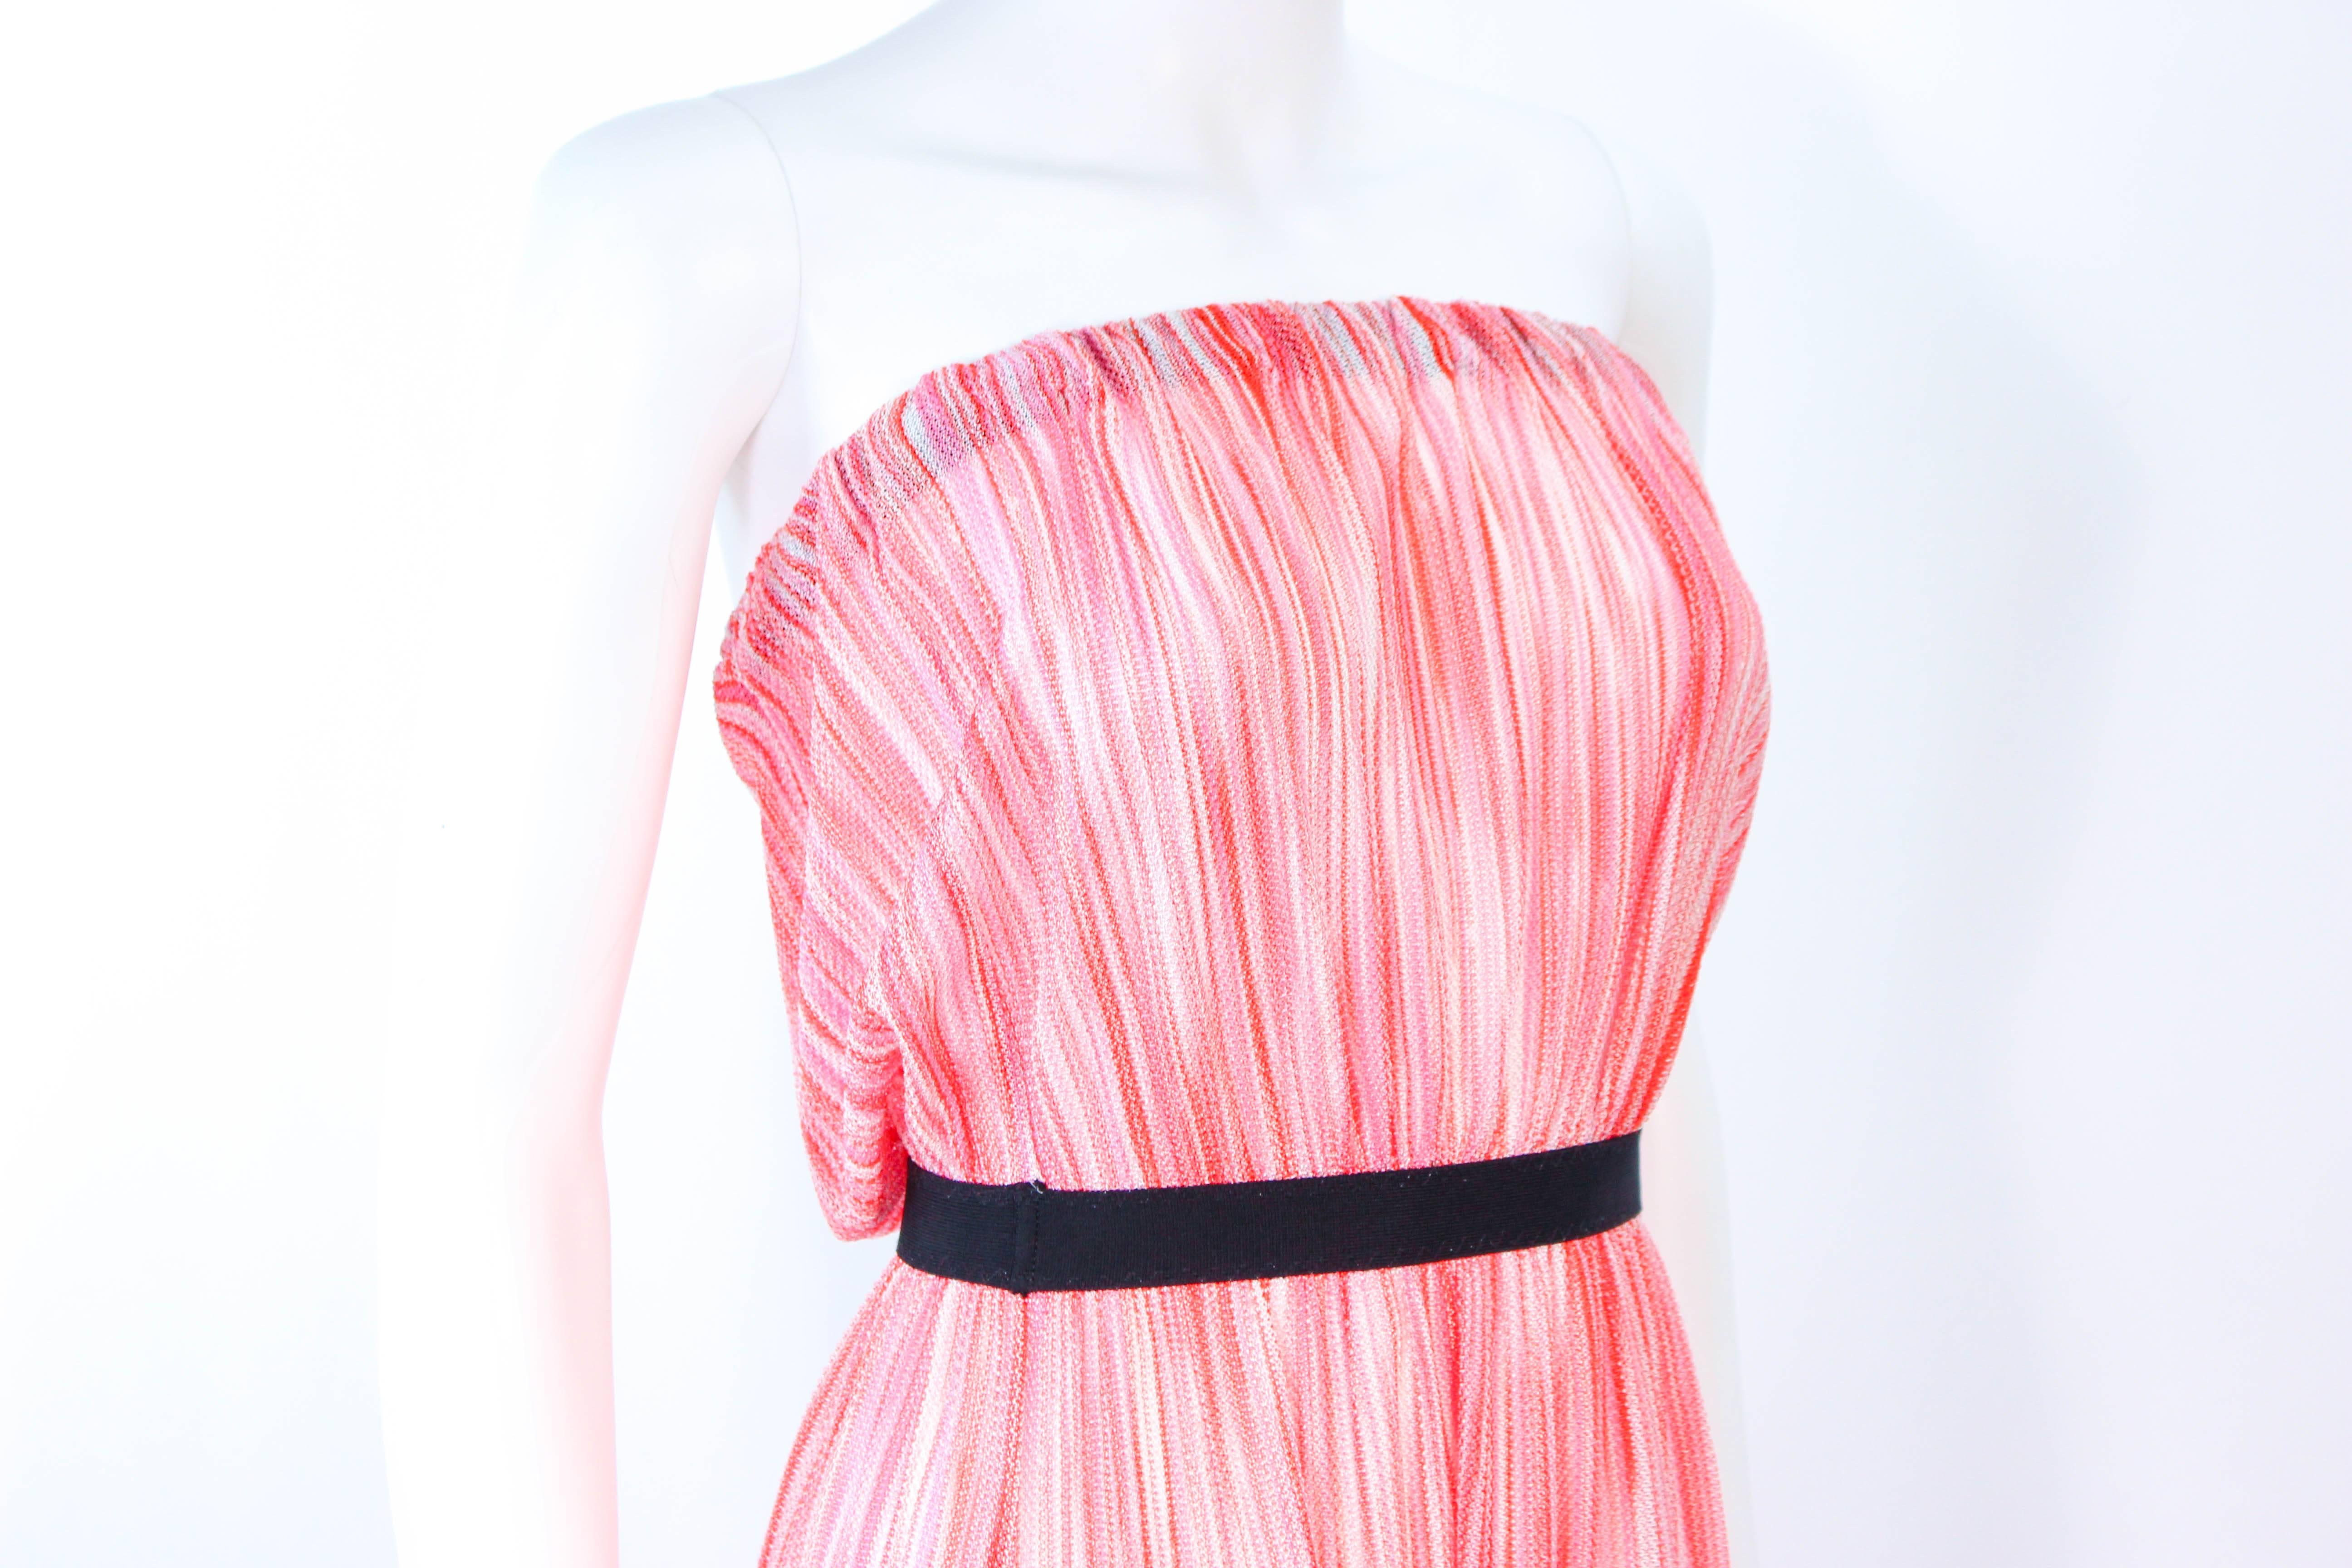 Women's MISSONI White Orange and Pink Knit Strapless Dress Size 4 6 For Sale